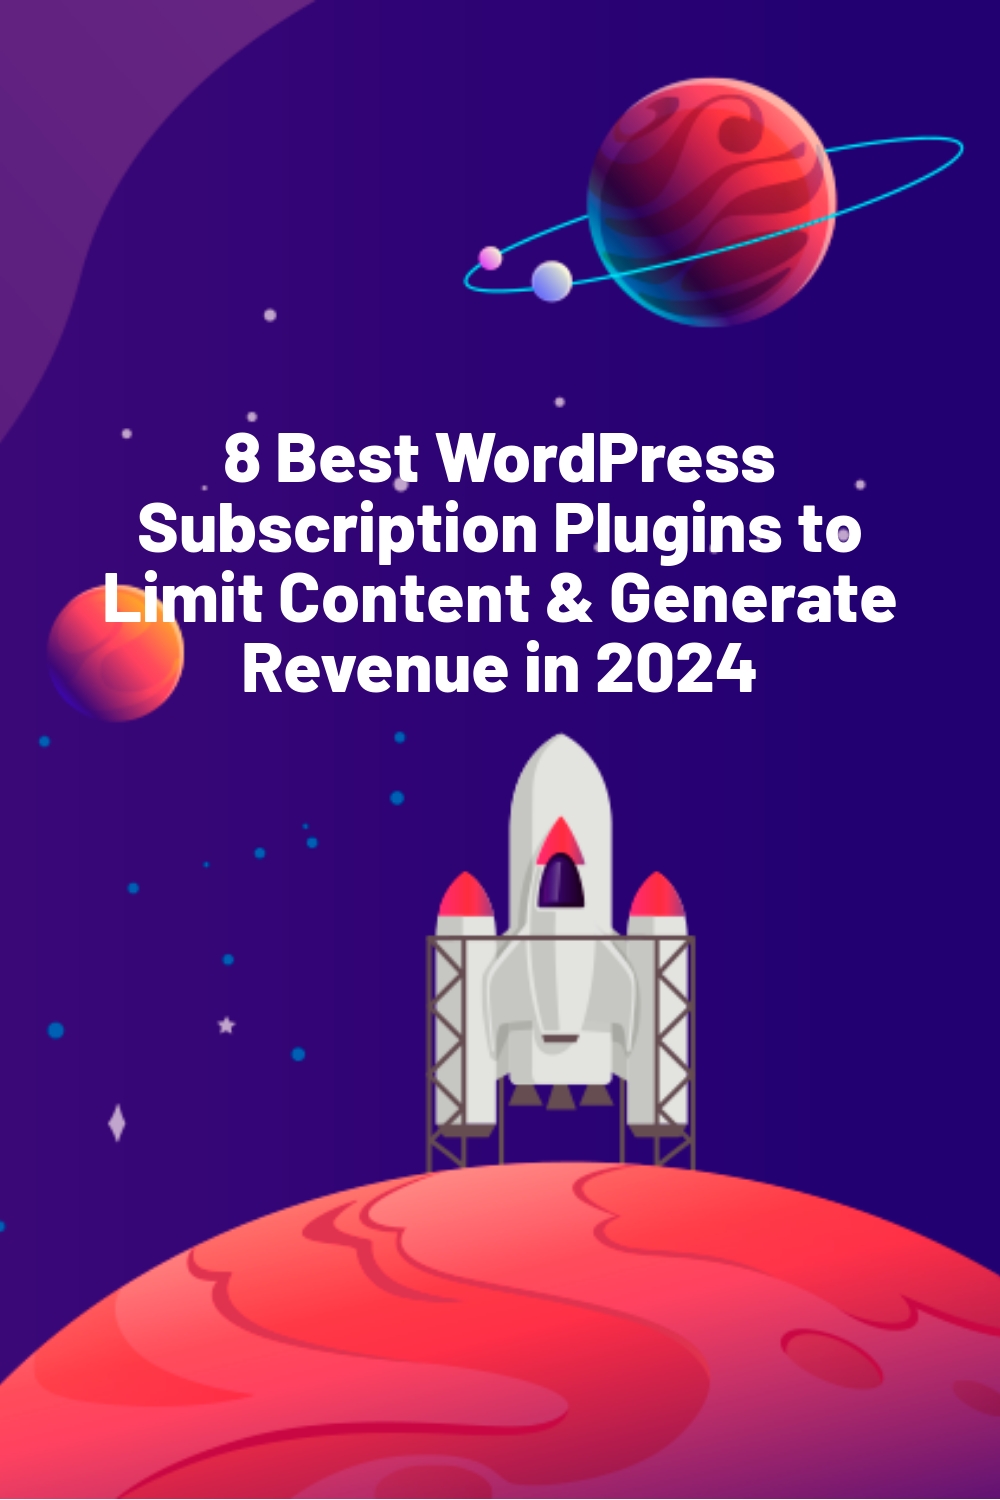 8 Best WordPress Subscription Plugins to Limit Content & Generate Revenue in 2024